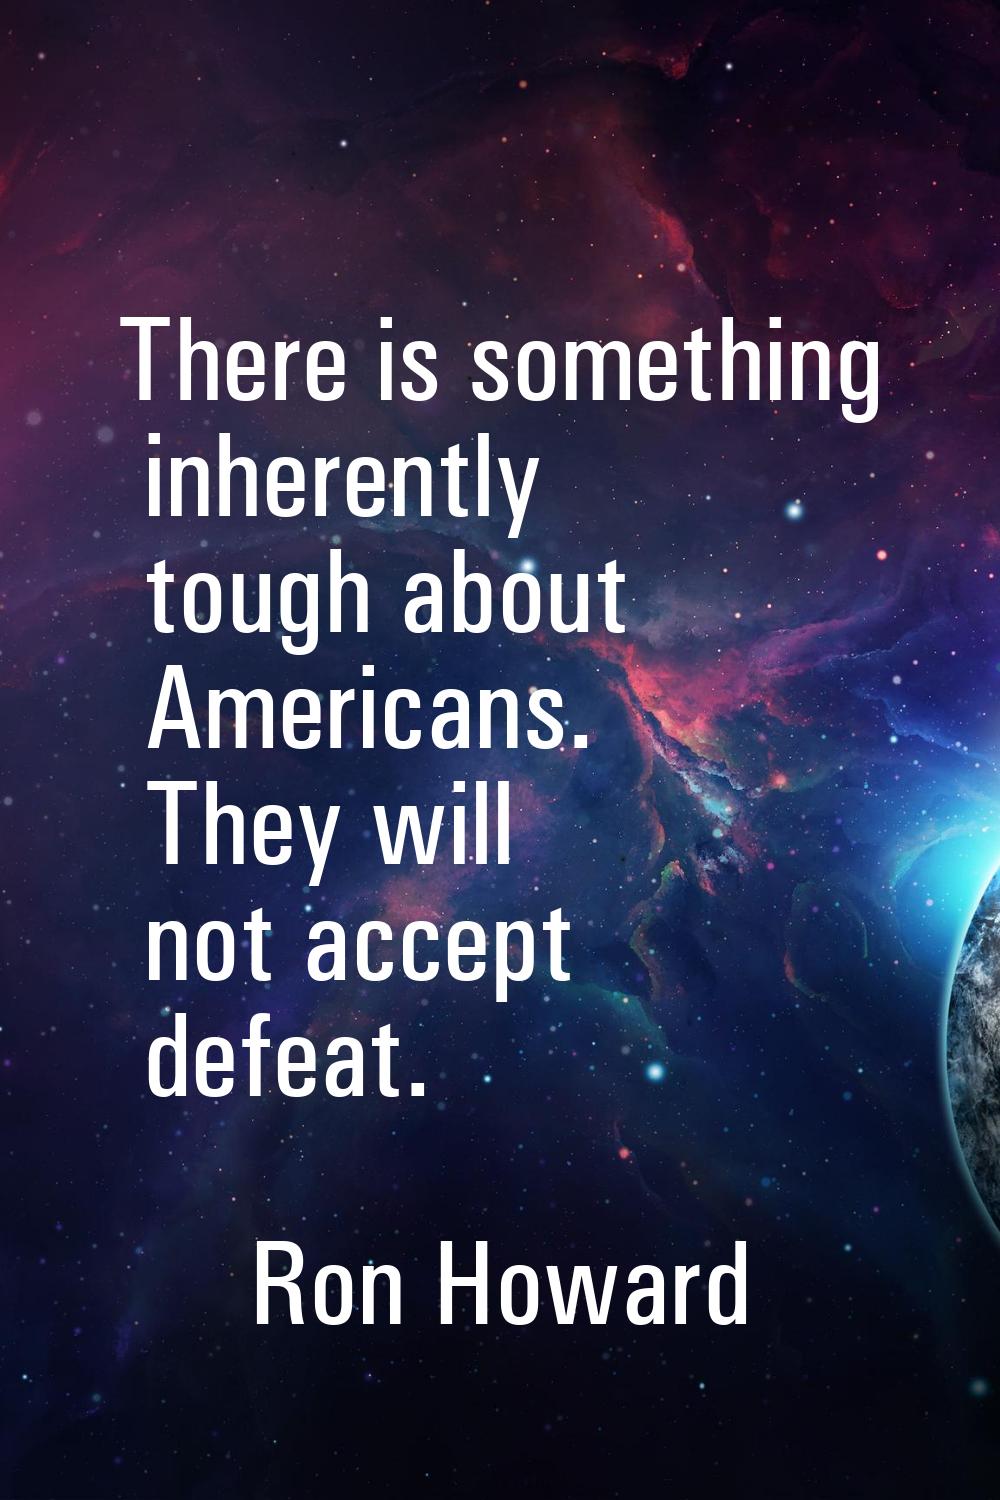 There is something inherently tough about Americans. They will not accept defeat.